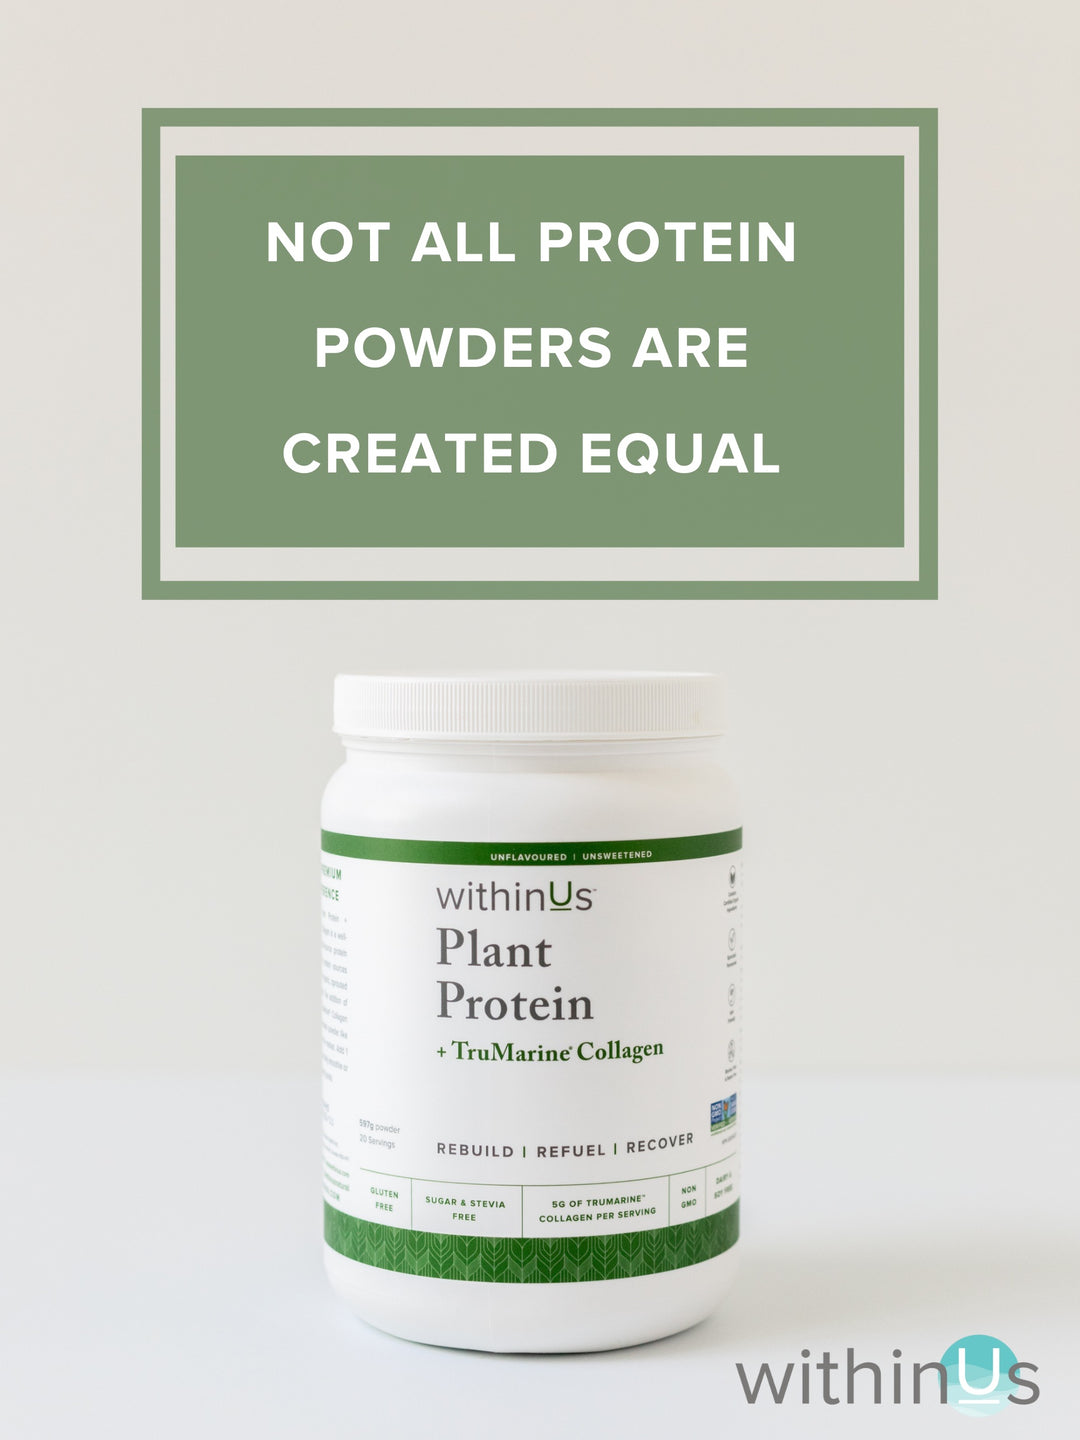 THE BENEFITS OF PROTEIN POWDER ~ WITHINUS™ TEAM